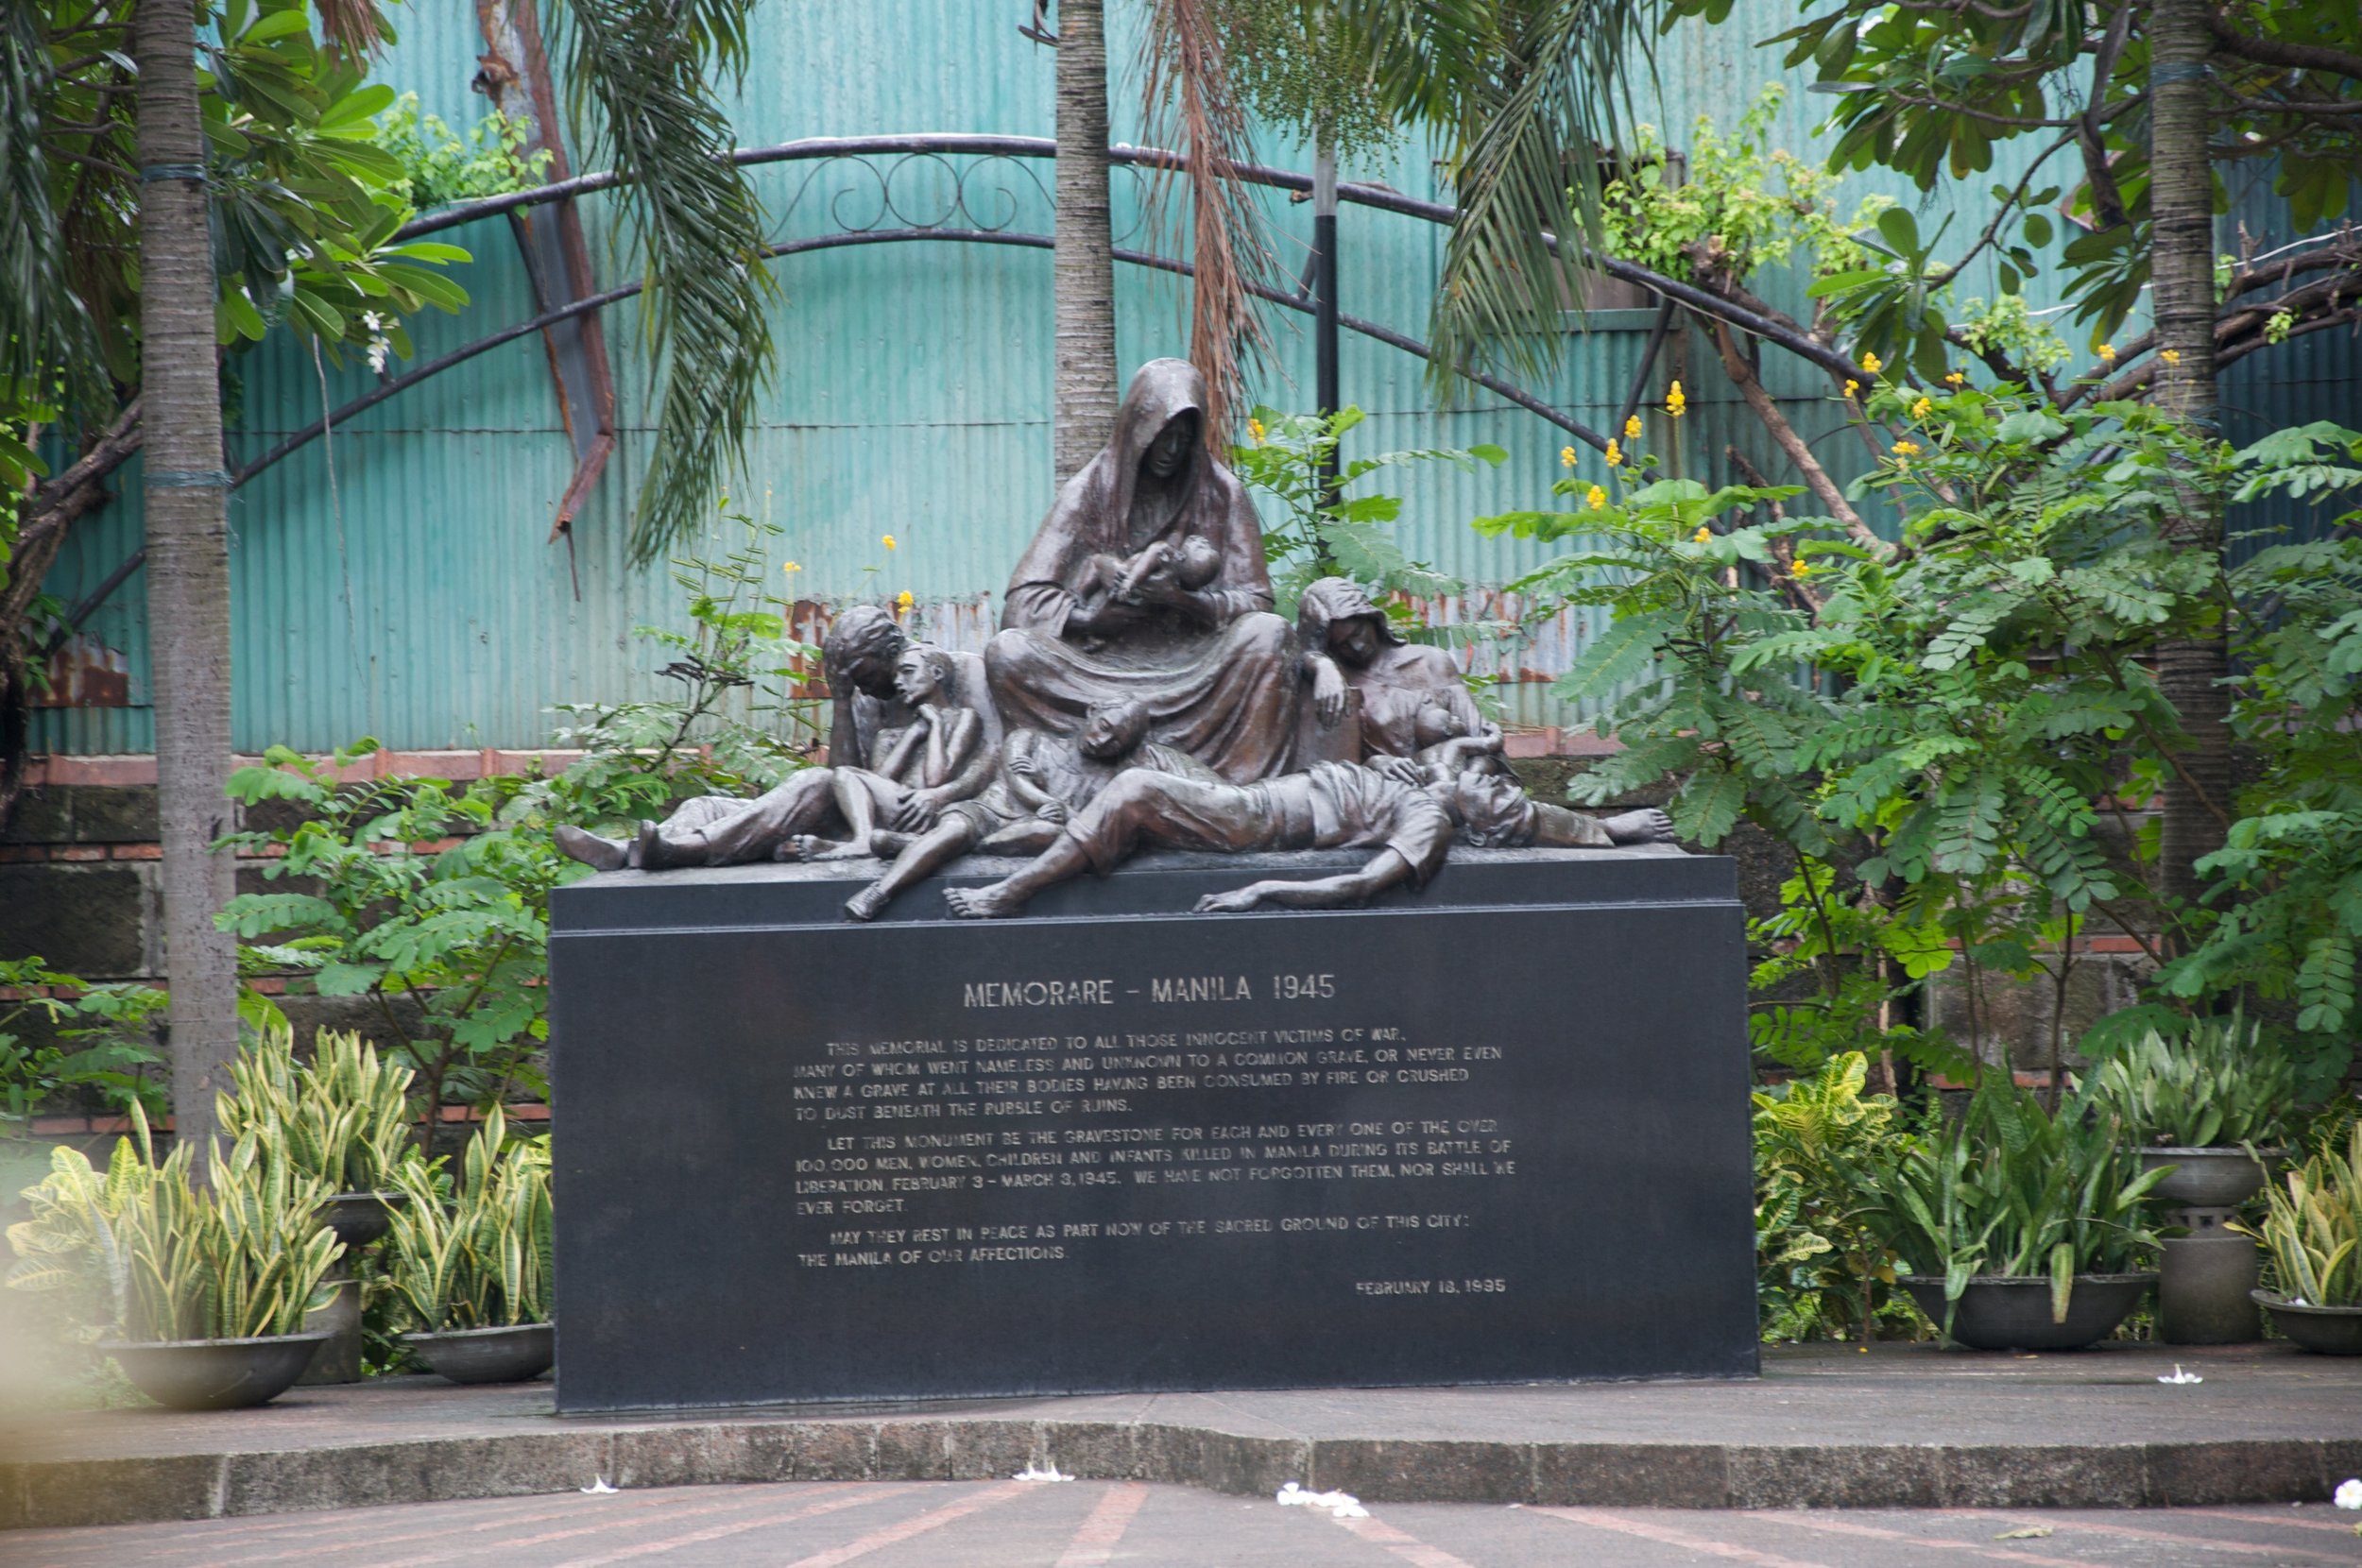 monument-depicting-how-150000-philippines-died-in-1945-1.jpg